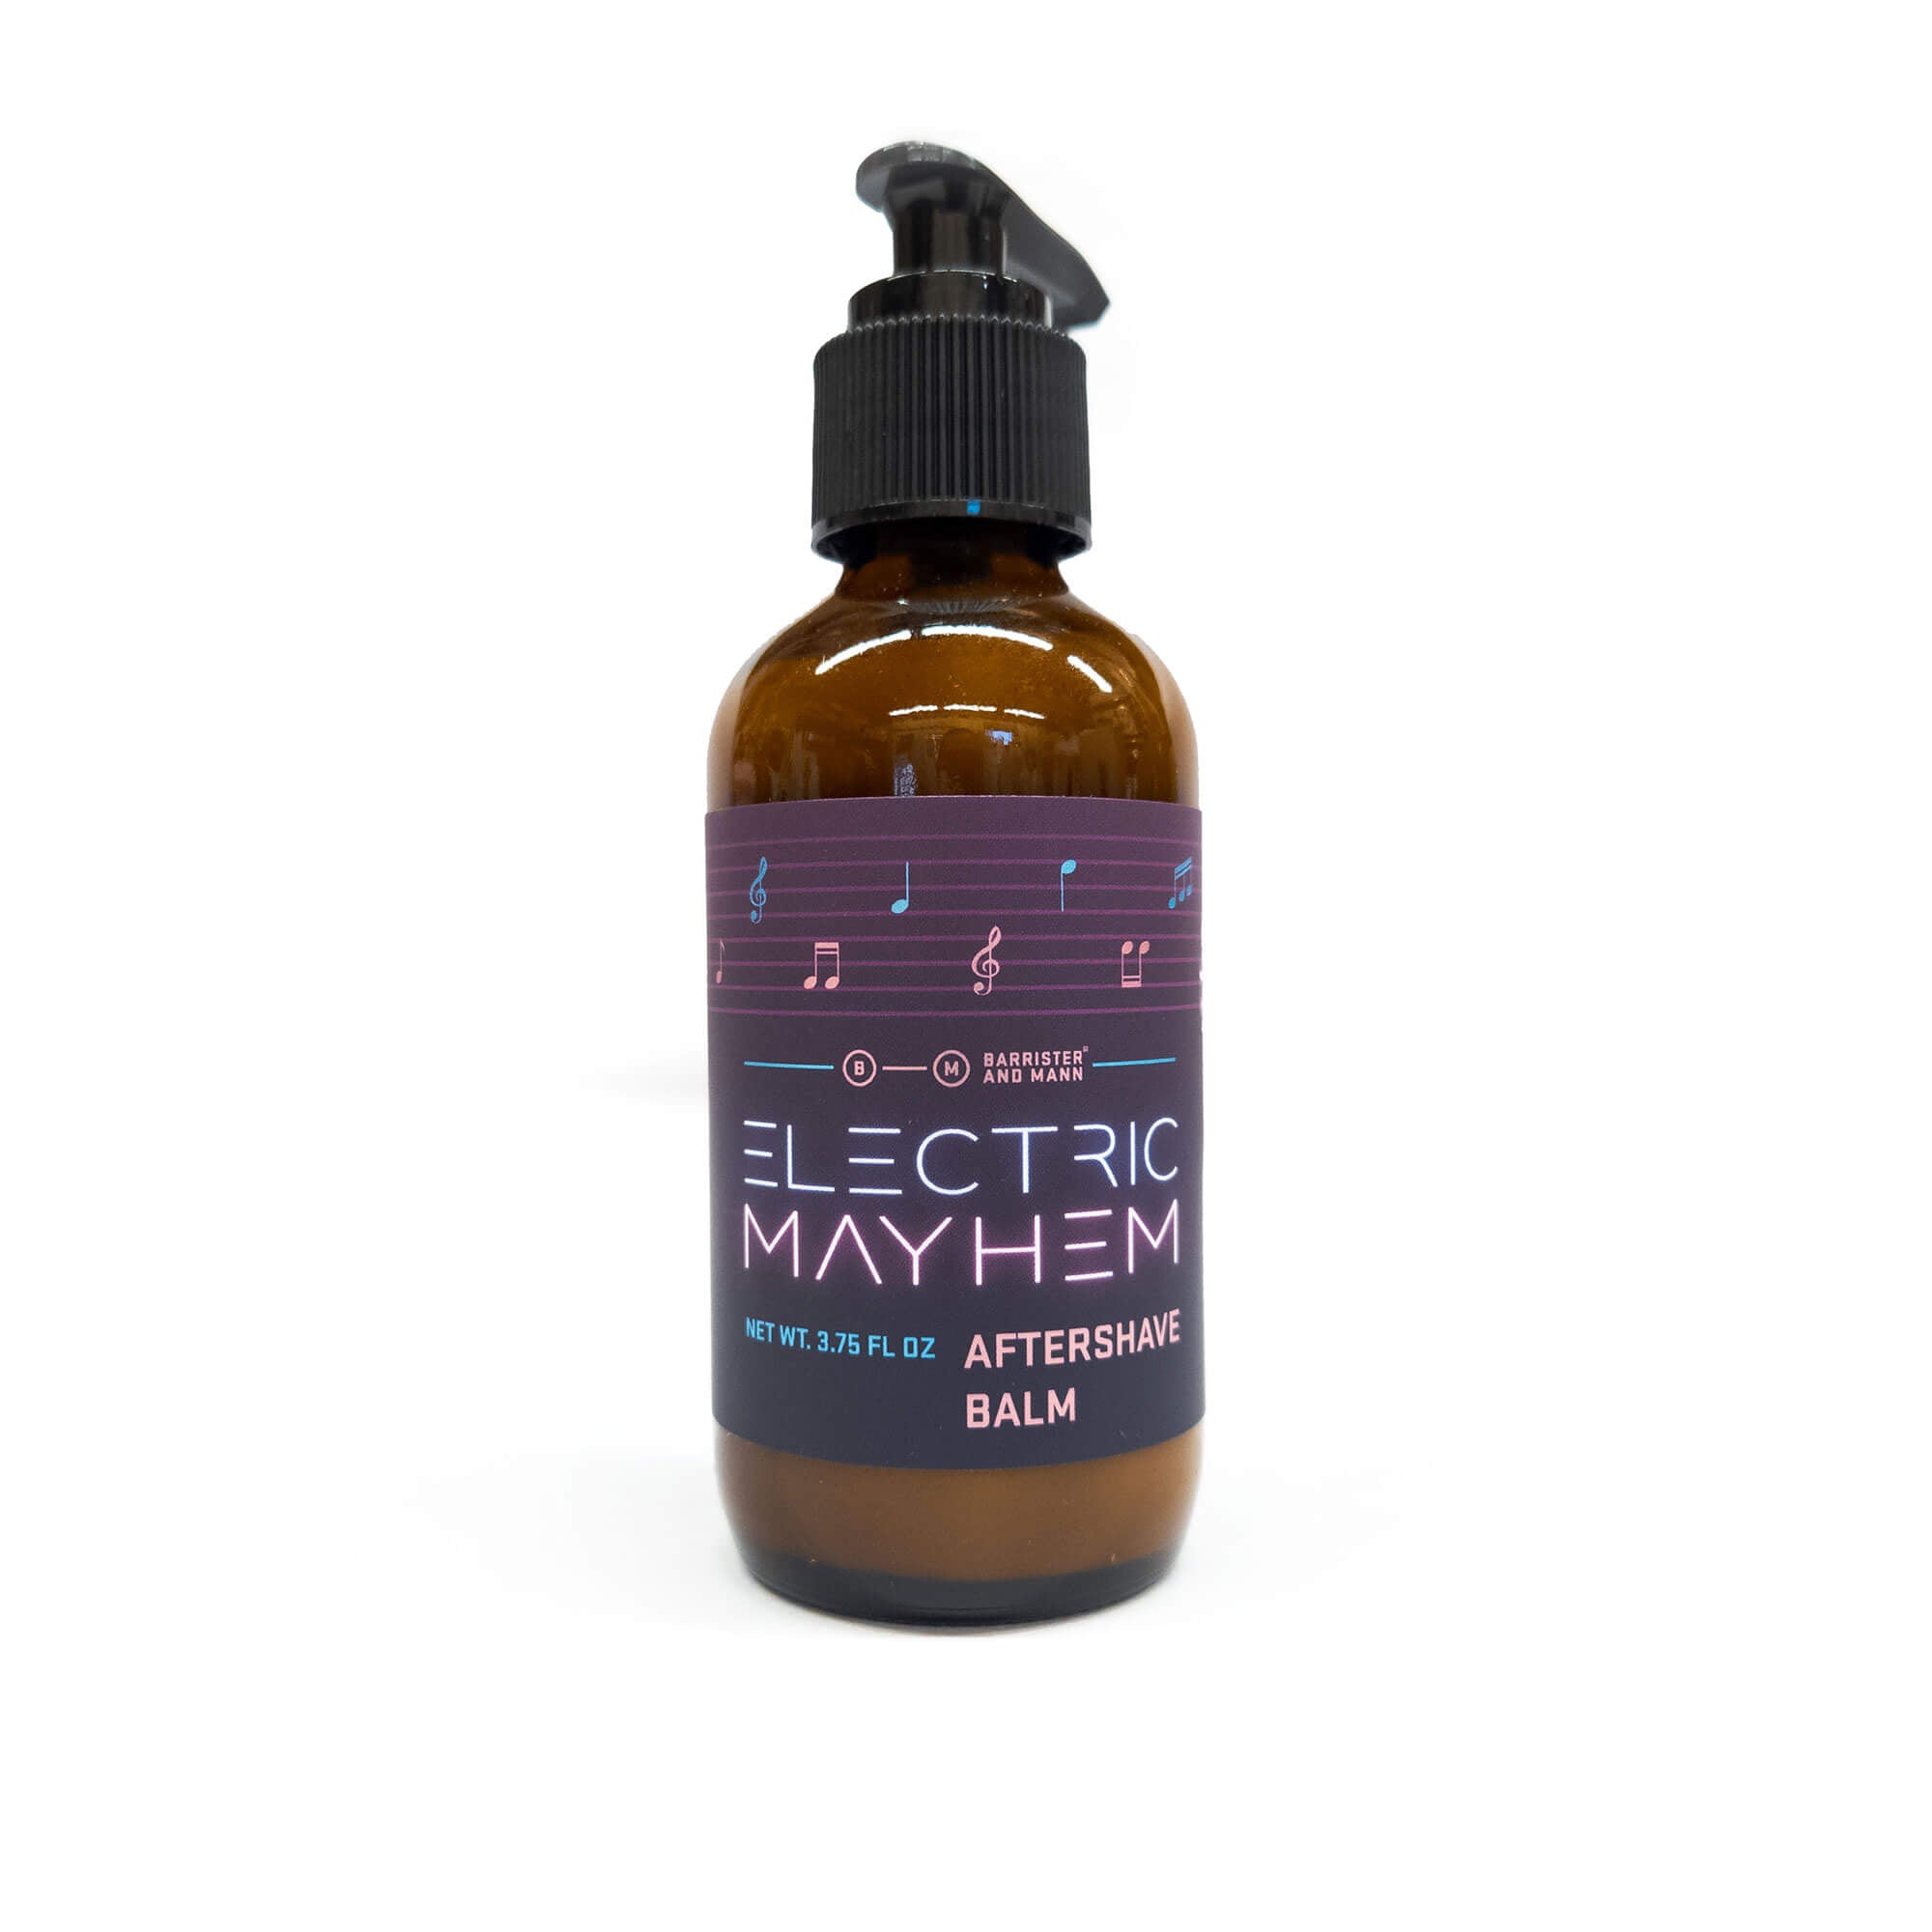 Barrister and Mann Electric Mayhem Aftershave Balm